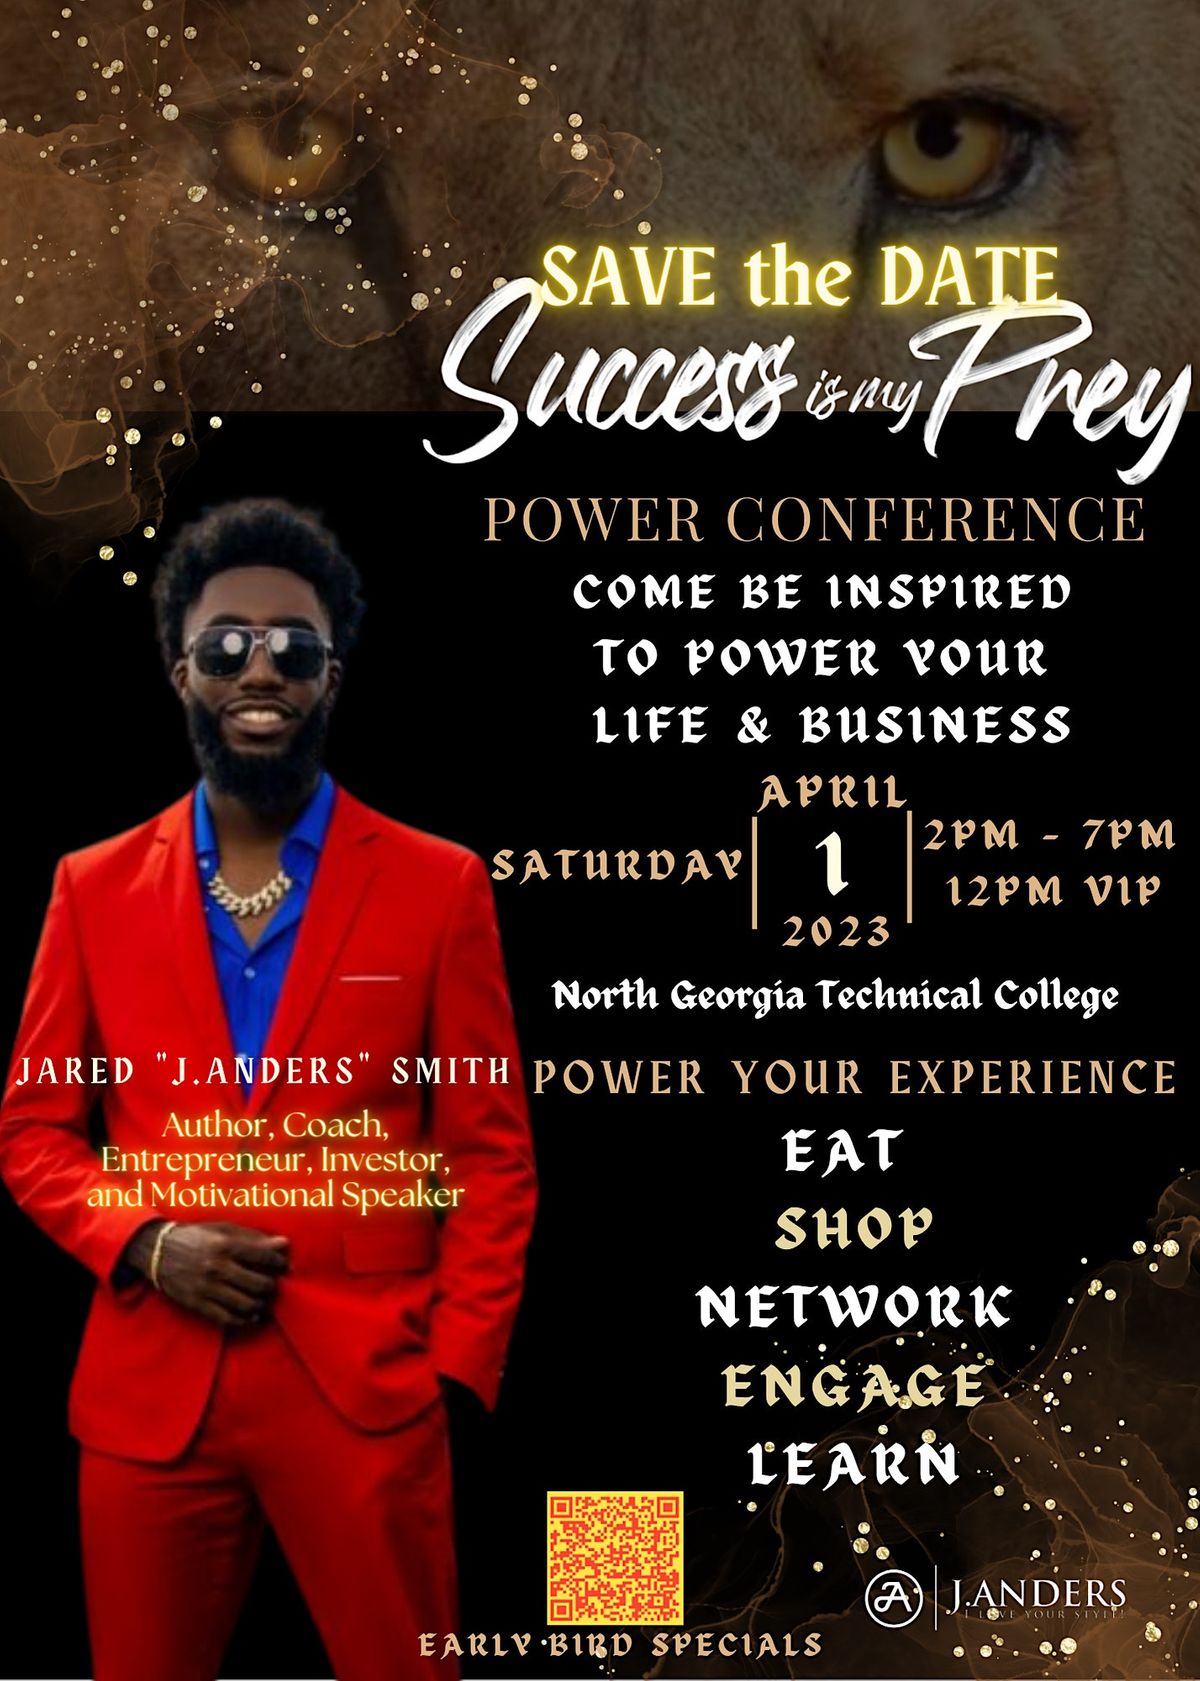 2023 Success Is My Prey Power Conference